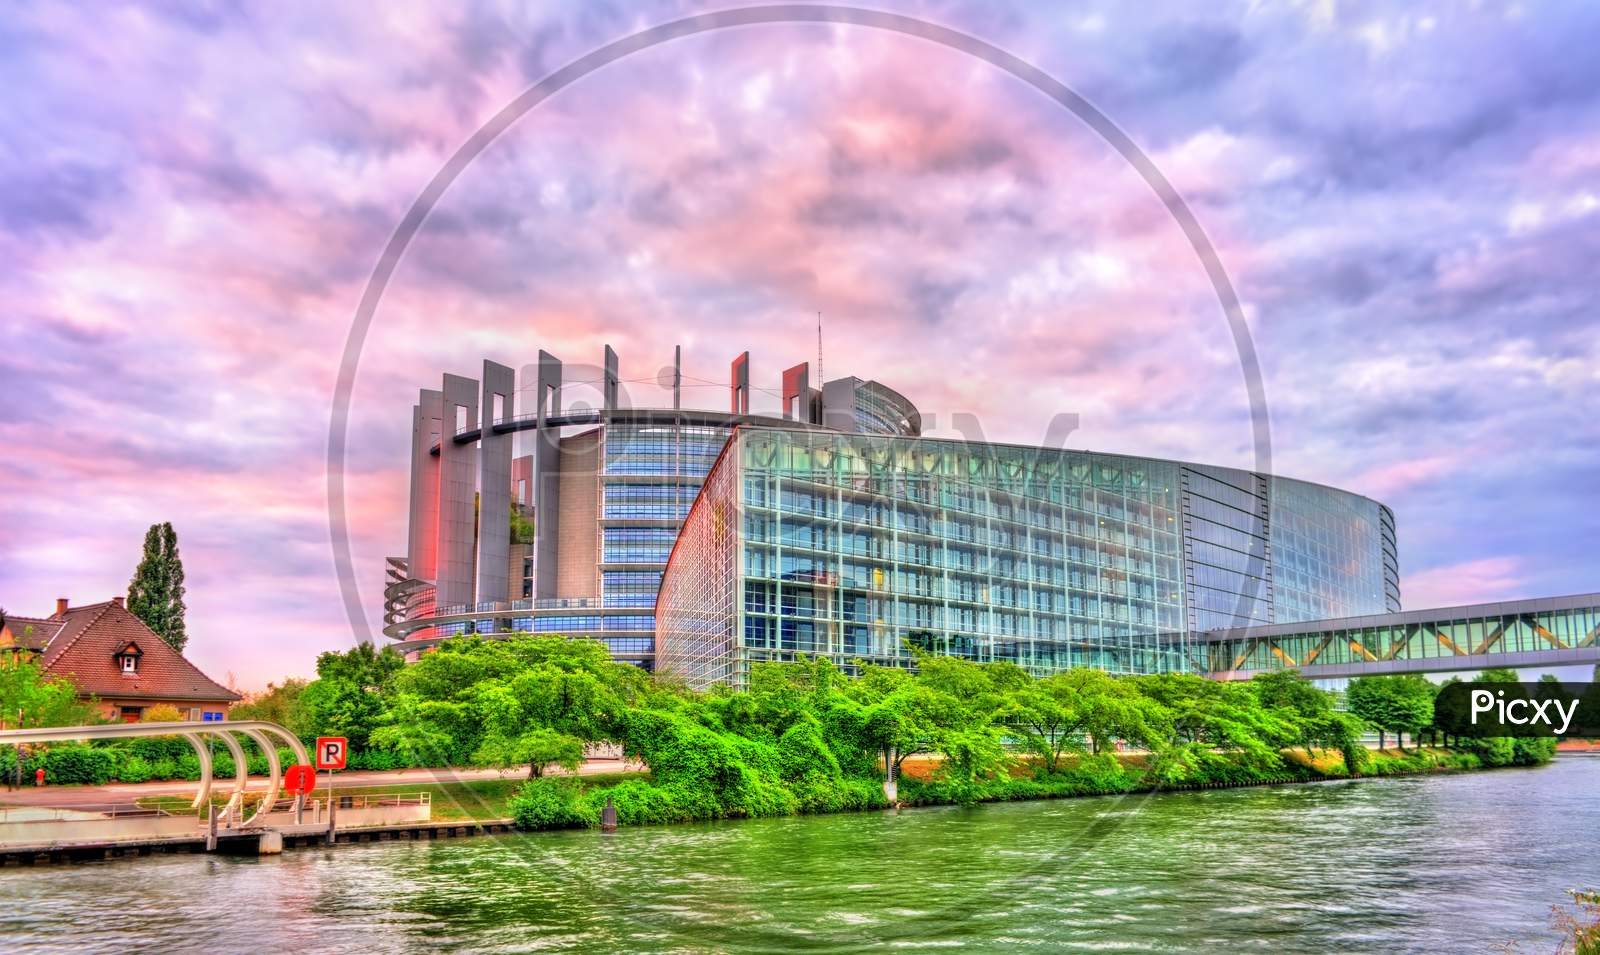 Louise Weiss Building Of European Parliament In Strasbourg, France